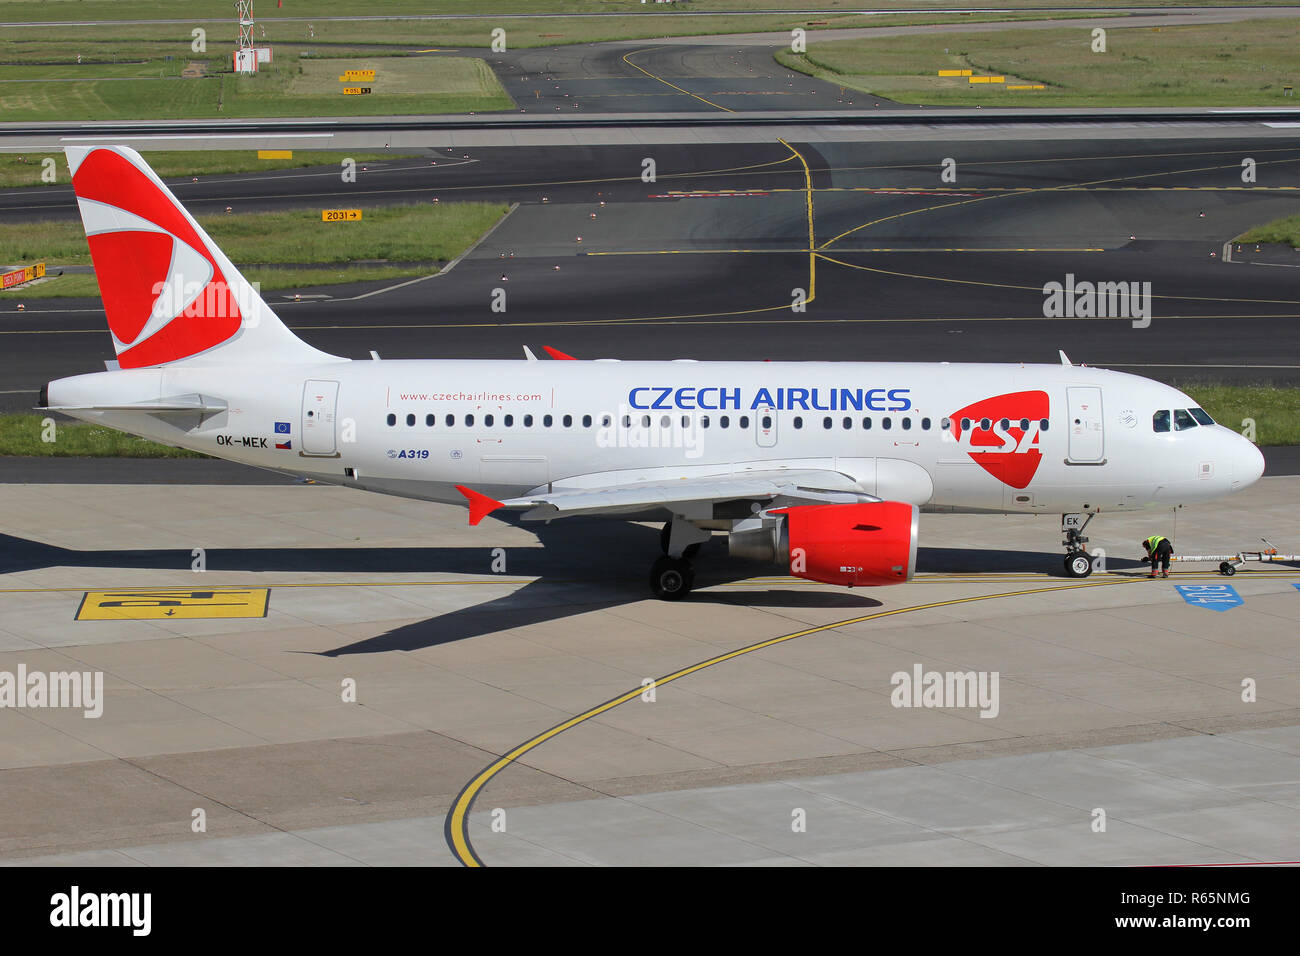 CSA Czech Airlines Airbus A319-100 with registration OK-MEK on the ramp of Dusseldorf Airport. Stock Photo